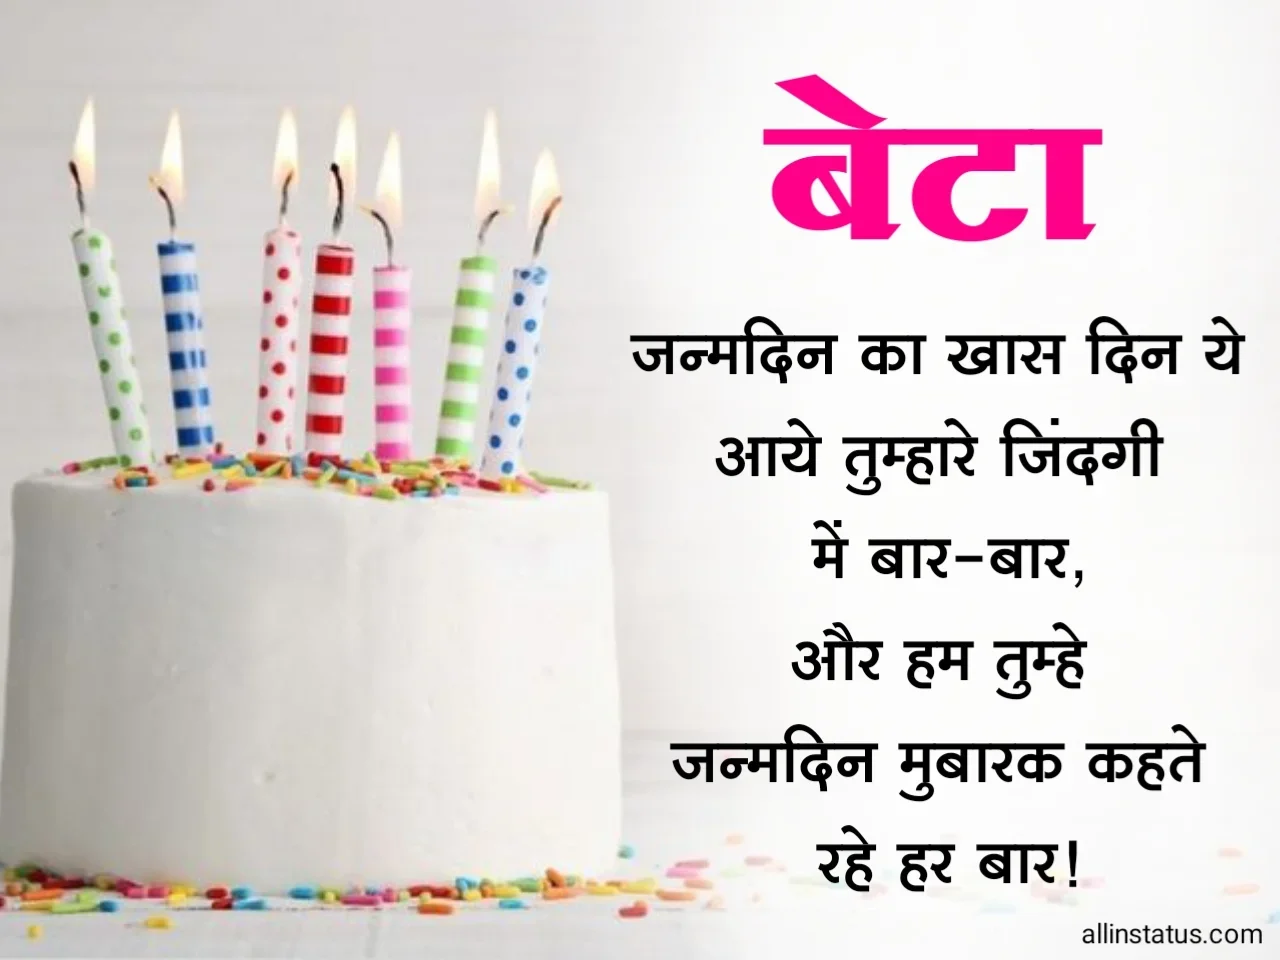 Happy birthday images in hindi for son